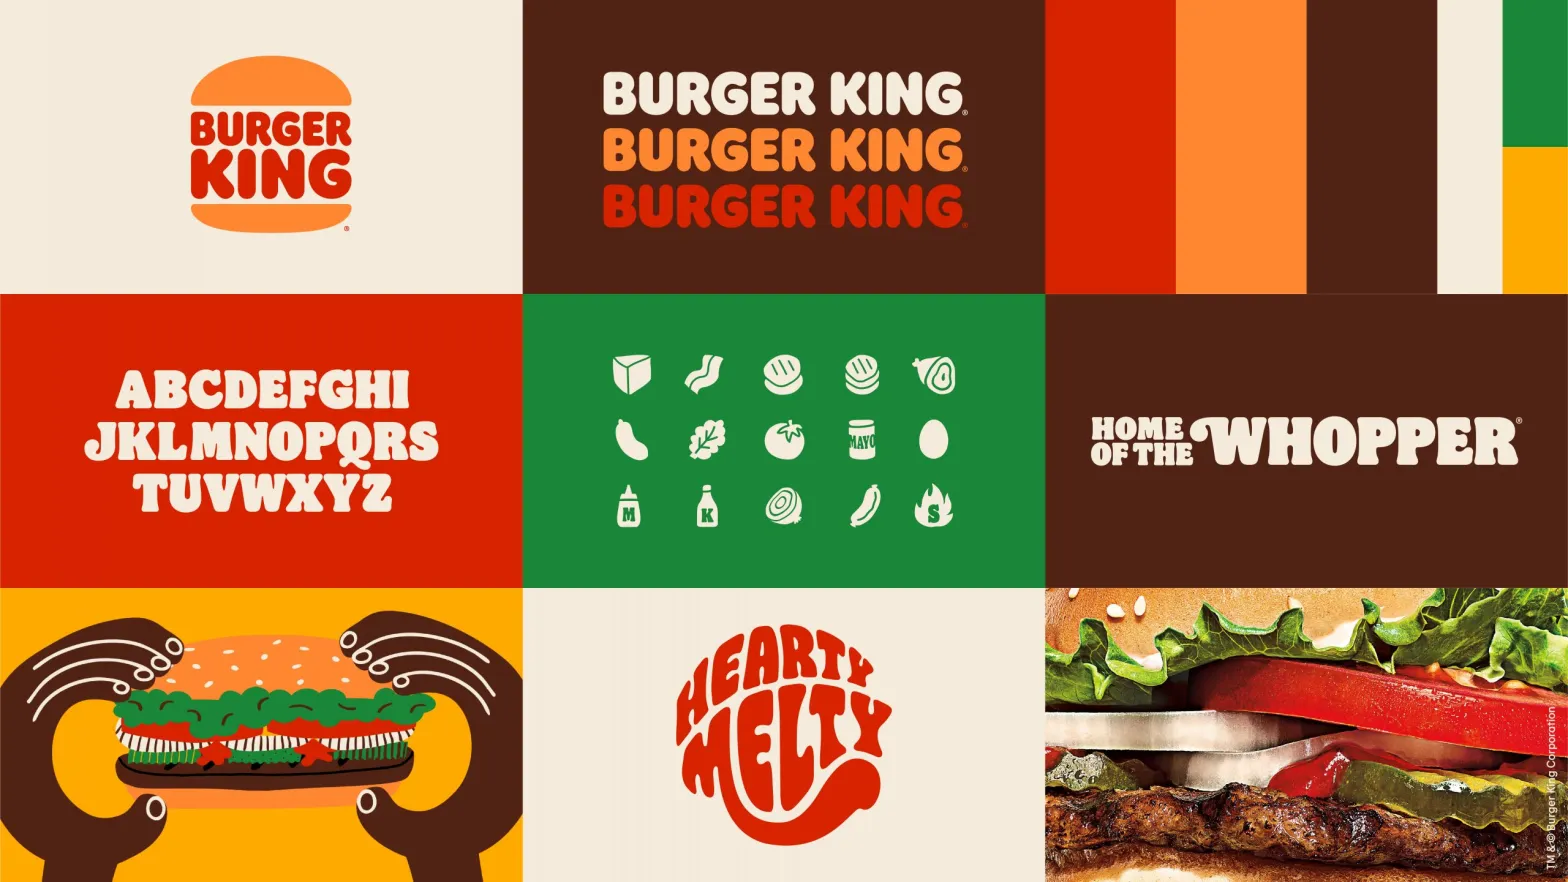 A sampling of Burger King's recent brand refresh; an example of a challenger brand shaking up the status quo.